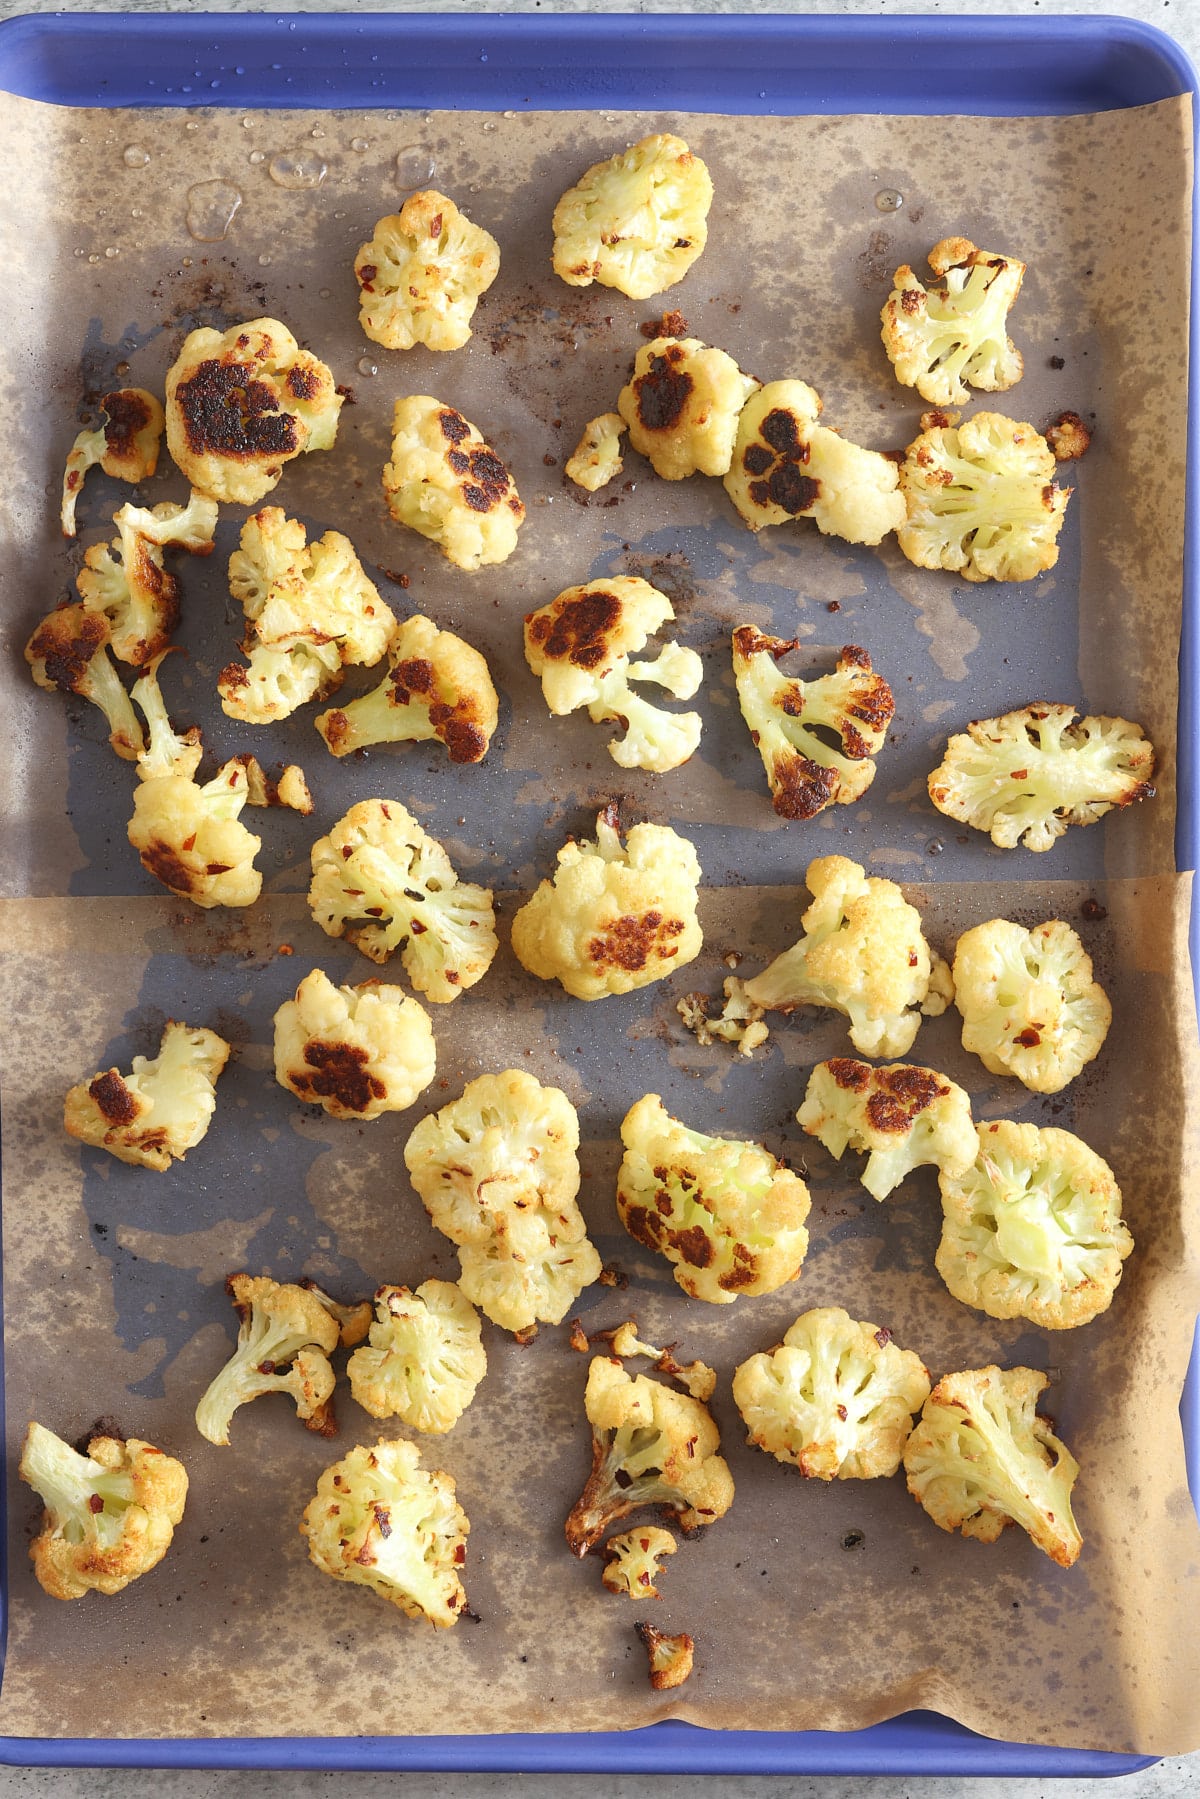 Cooked oven roasted cauliflower still on the baking sheet.